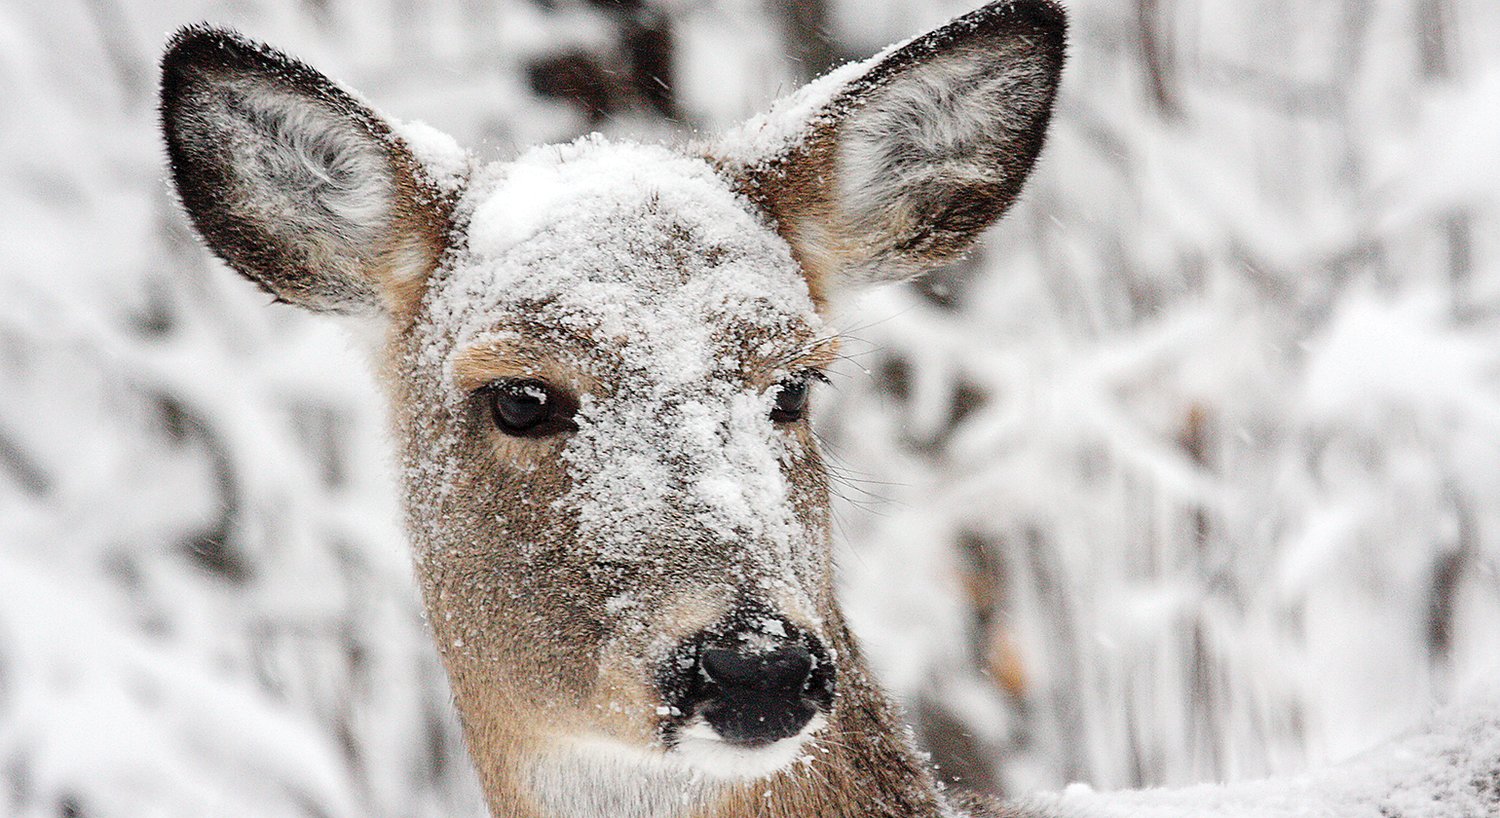 Winter may end “tougher than average” for whitetails - The Timberjay